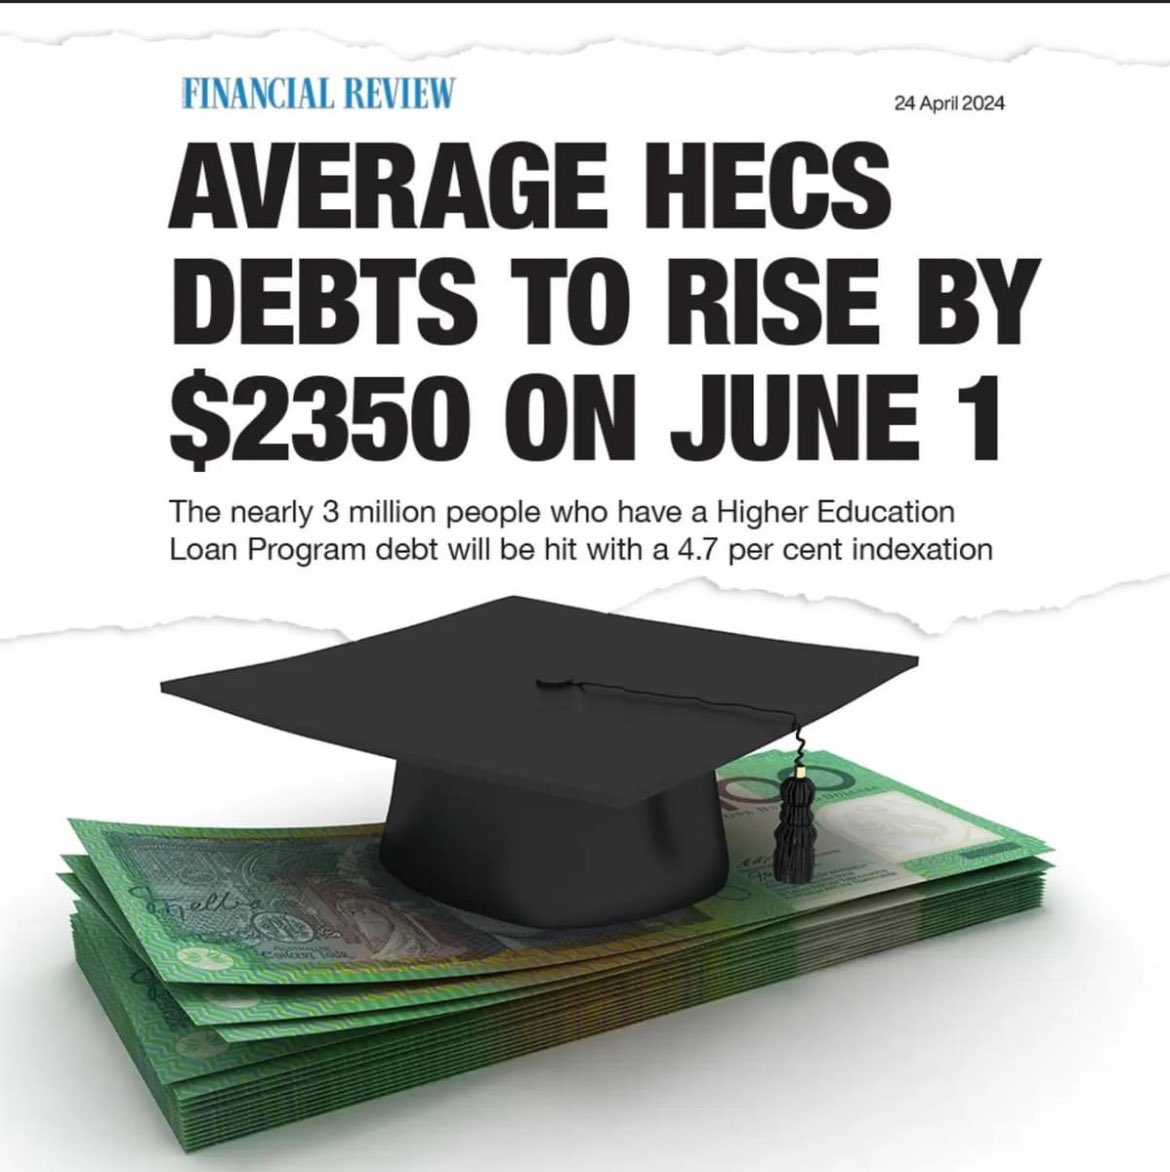 Labor’s high inflation means higher bills for households and also, more student debt for 3 million Australians.